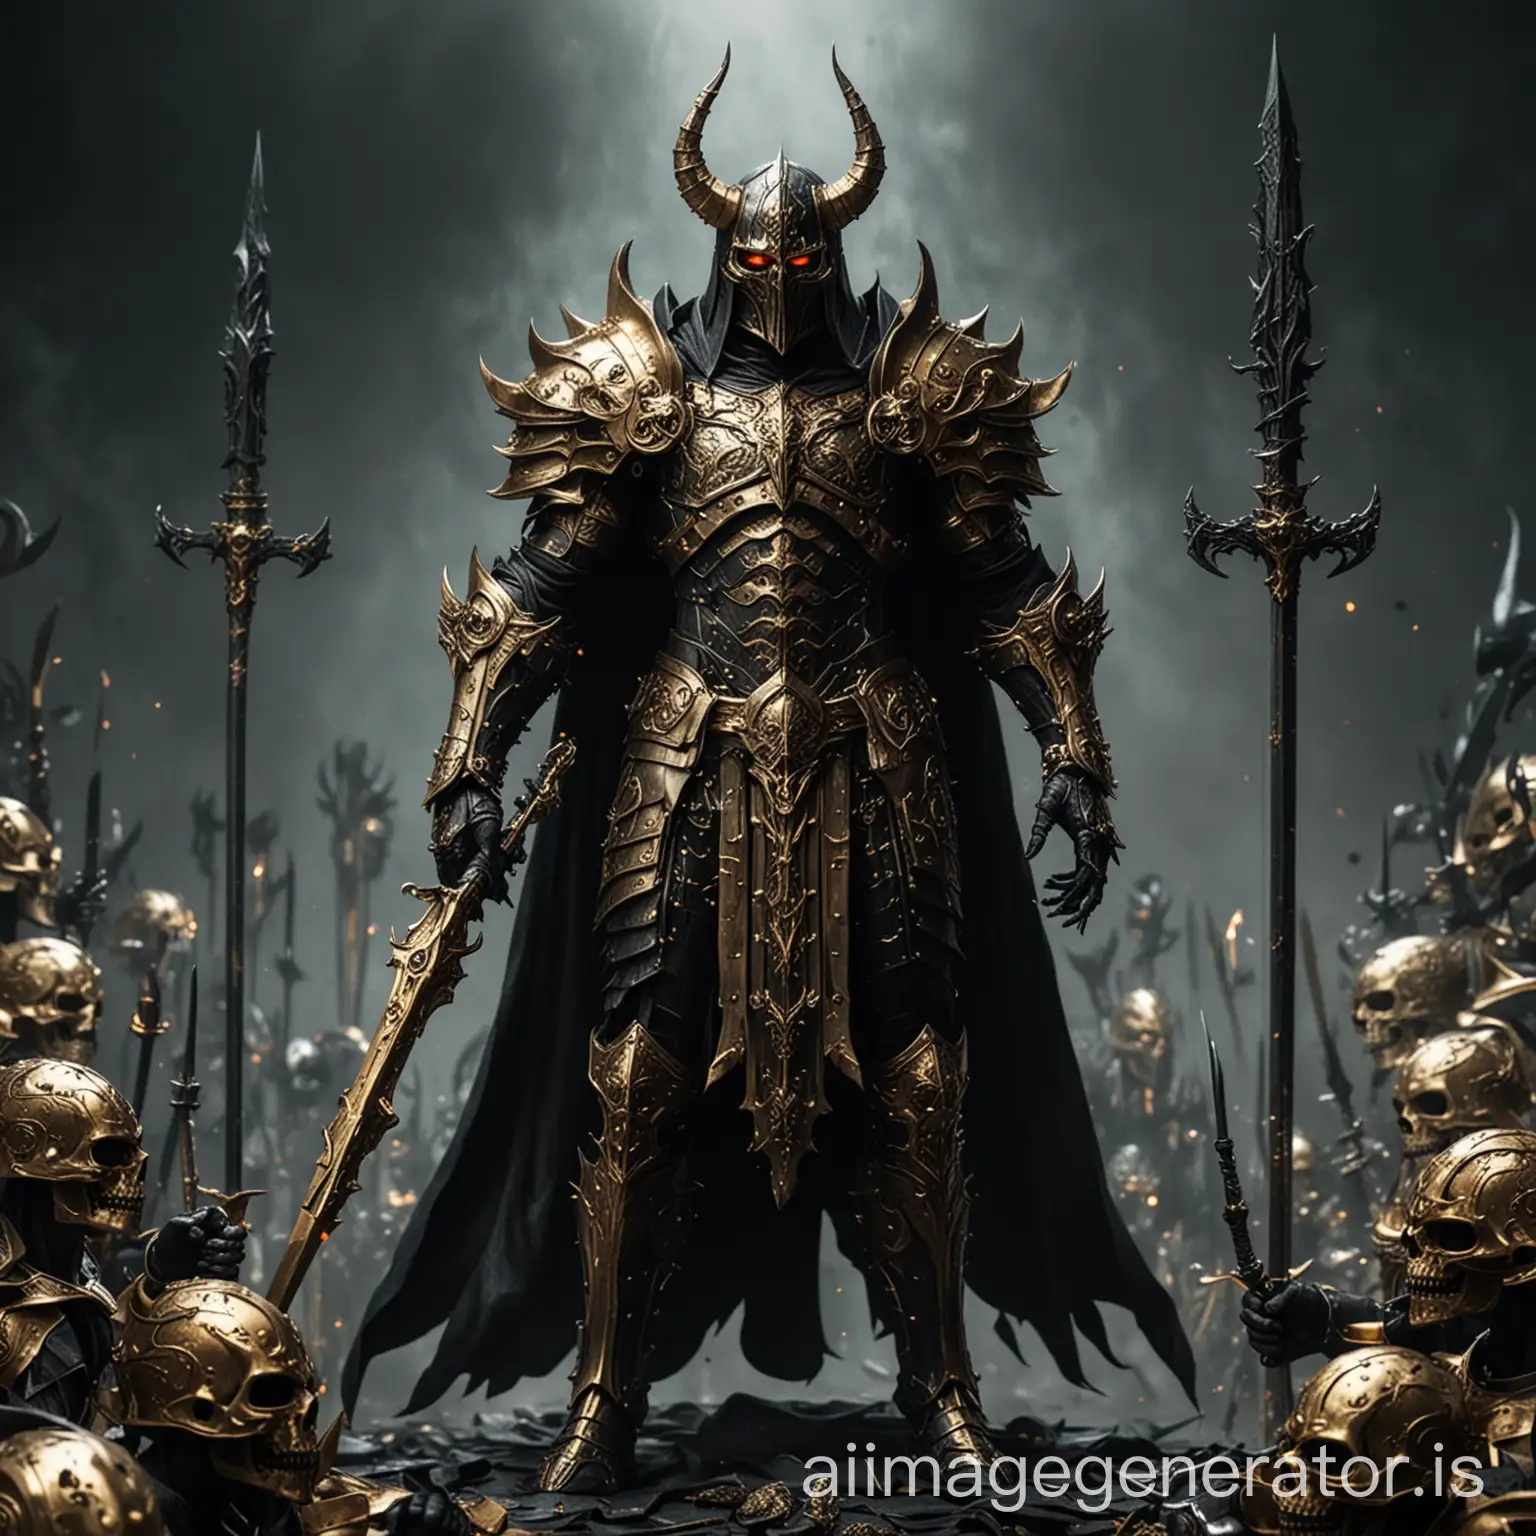 Powerful-Dark-Lord-in-Golden-Armor-with-Weapons